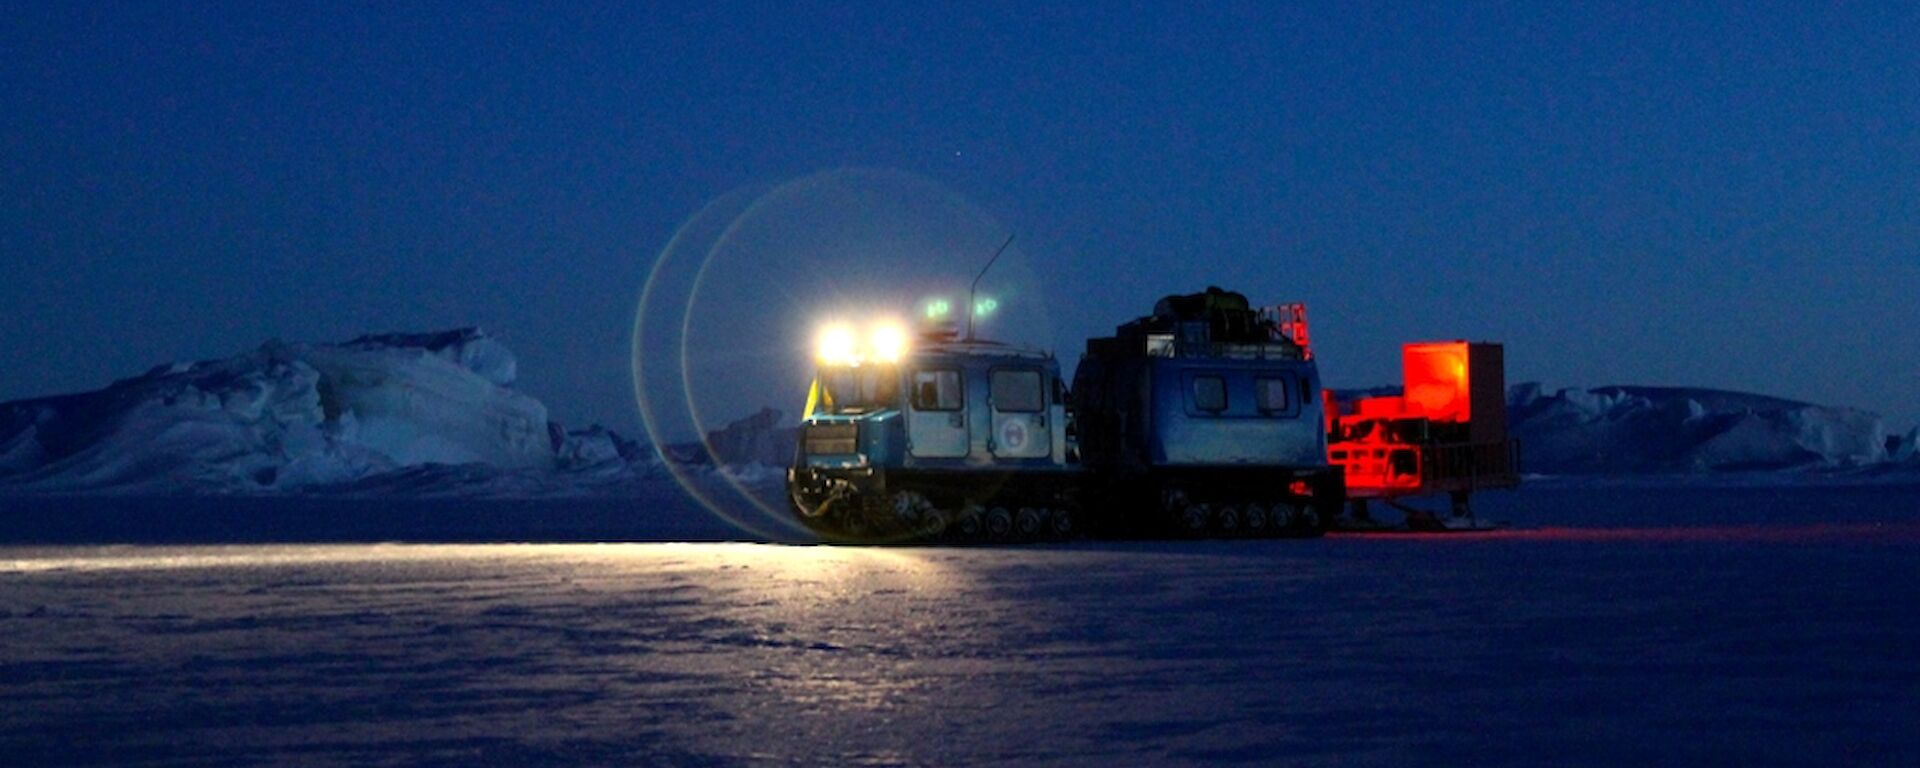 The blue Hägglunds vehicle towing a sled with it headlights on in the early hours of the morning